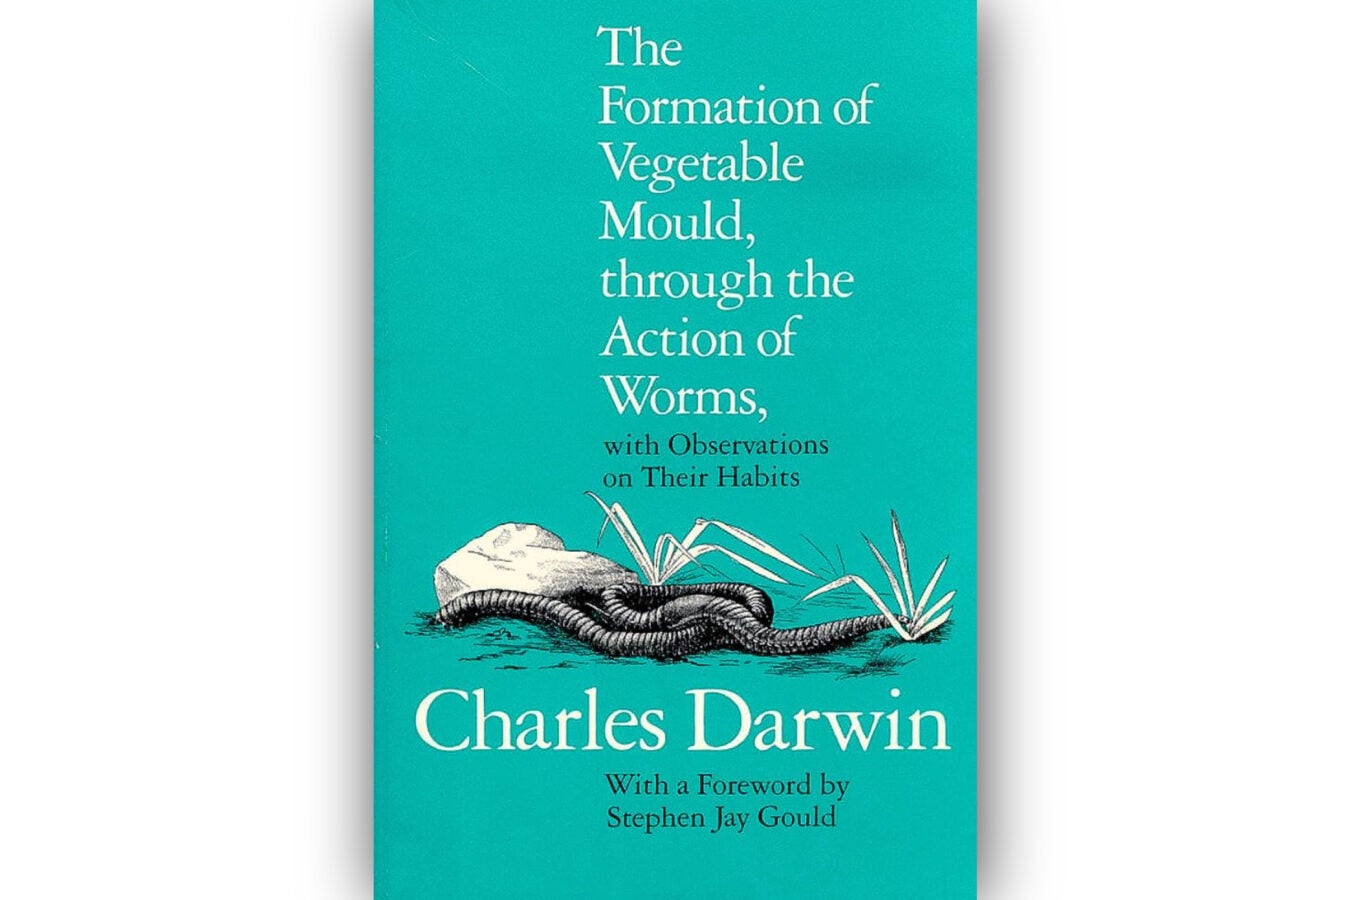 Book cover: "The Formation of Vegetable Mould Through the Action of Worms."